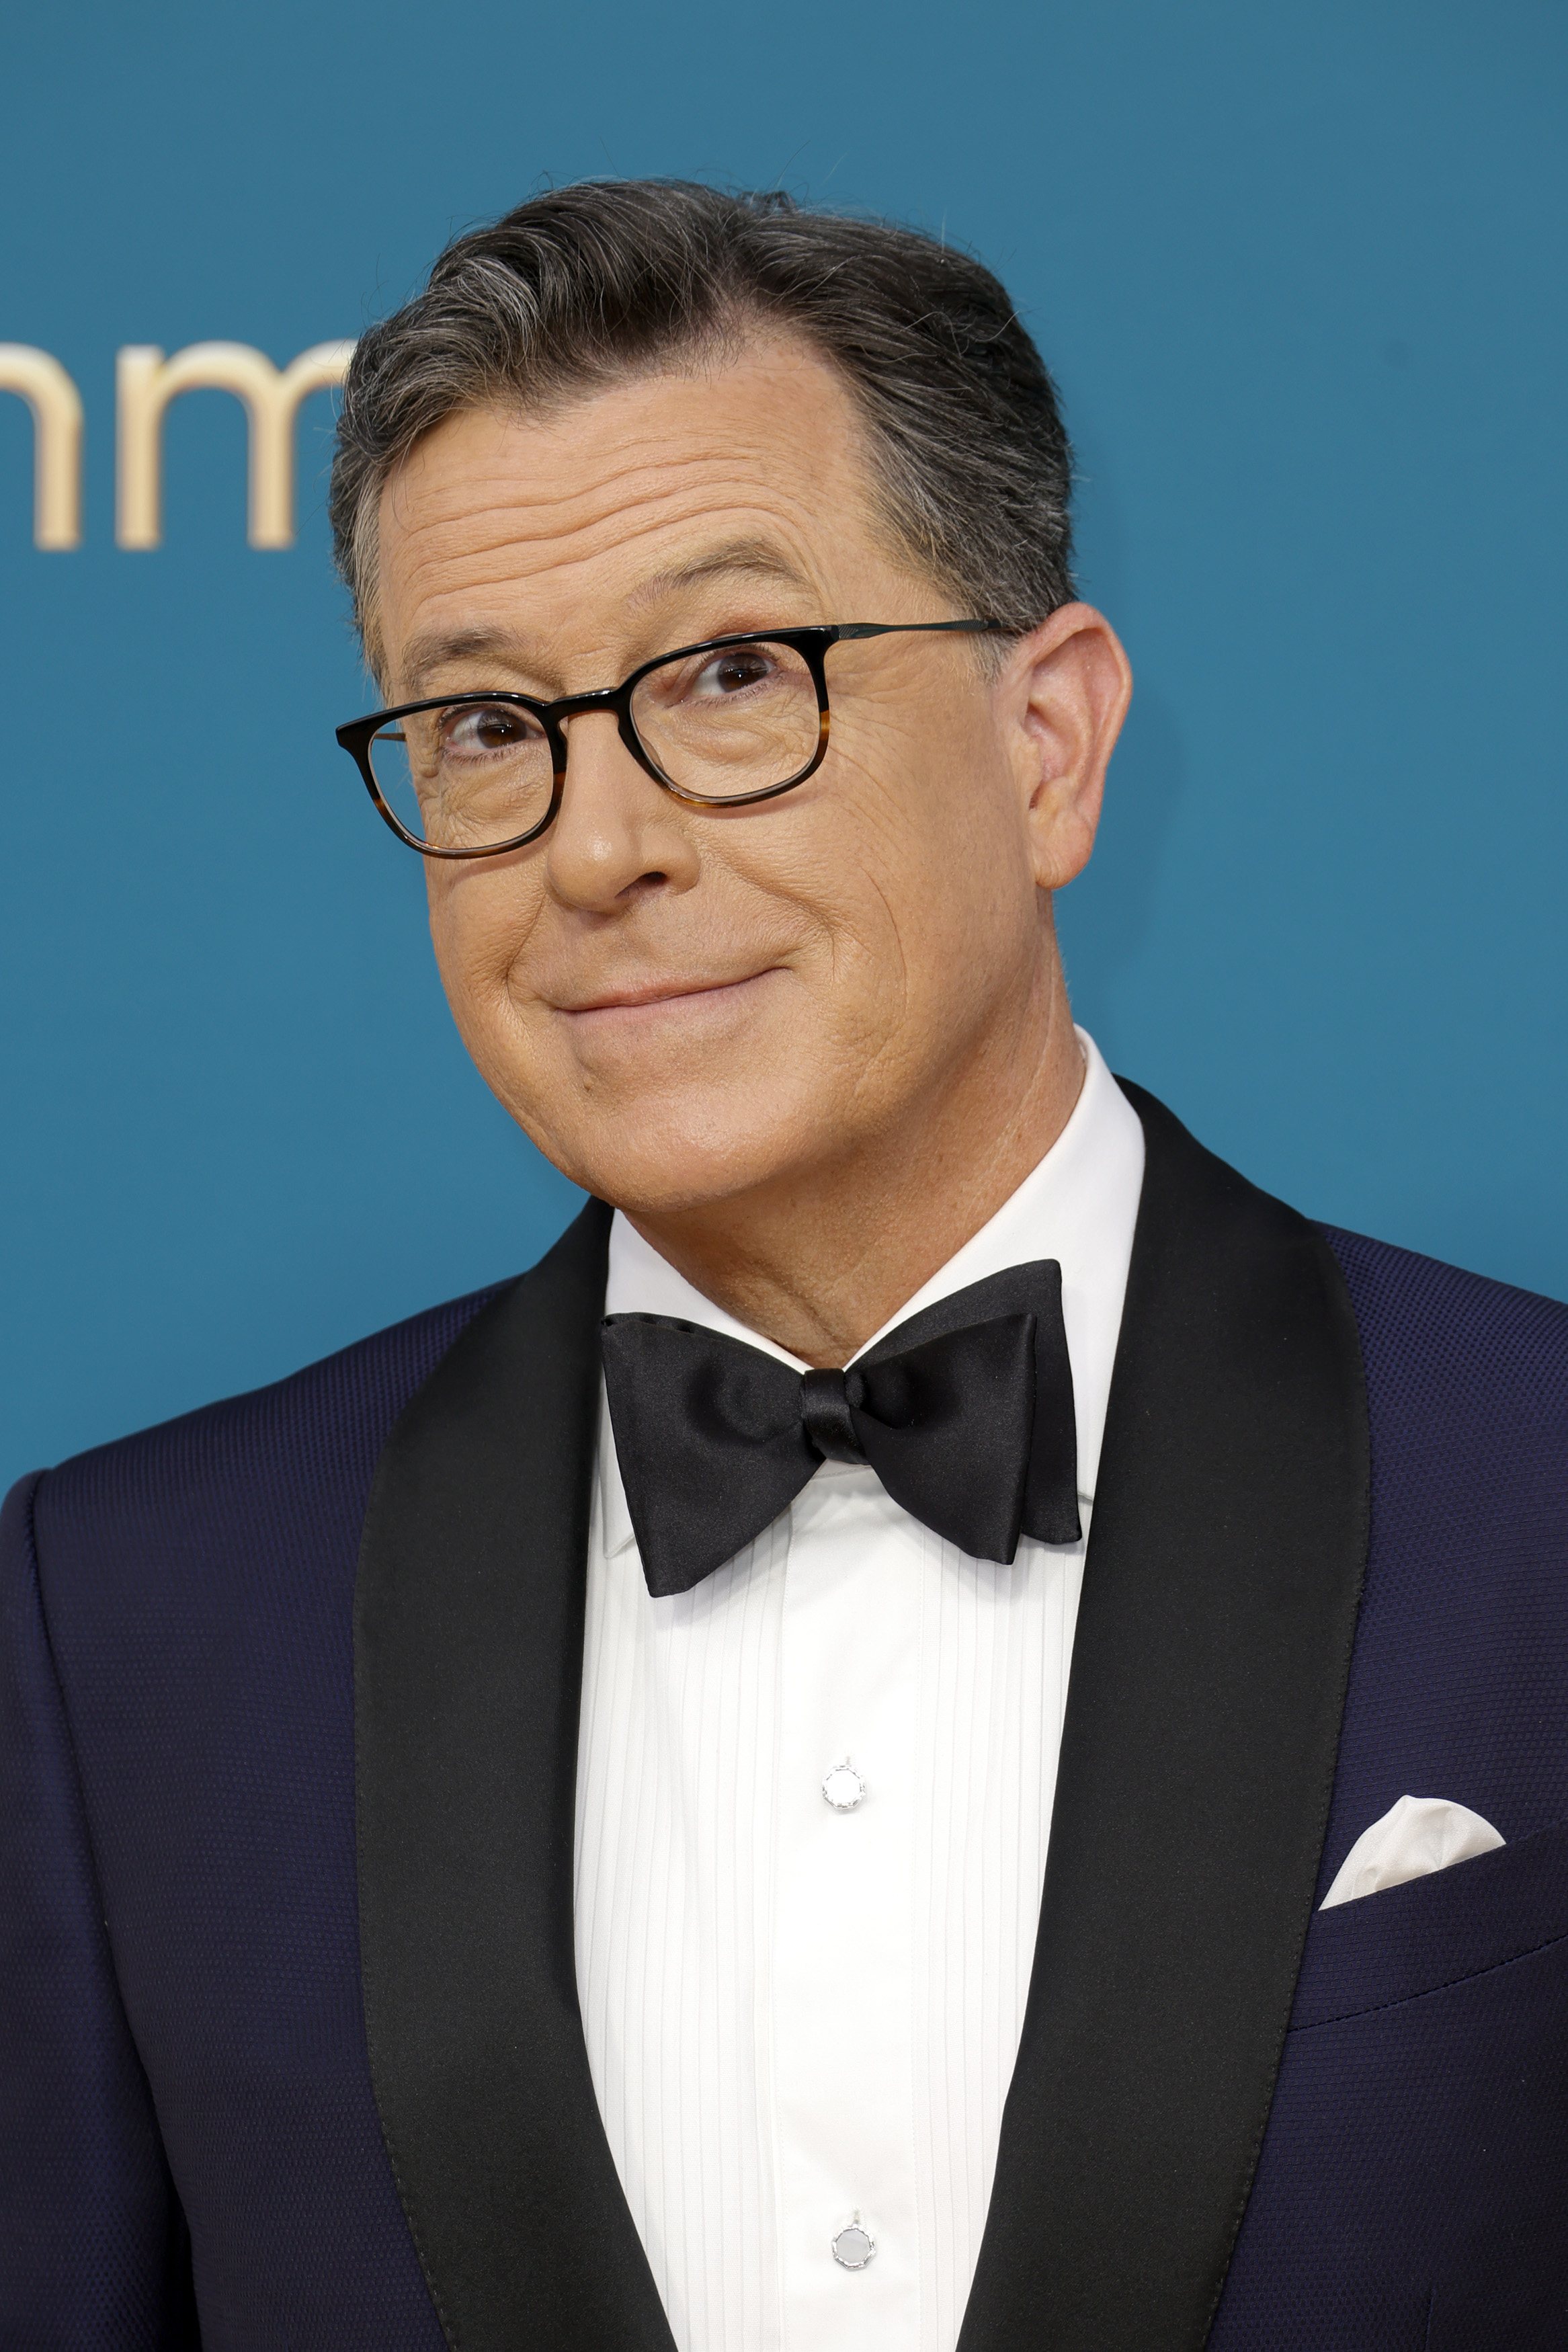 Stephen Colbert at the 74th Primetime Emmys on September 12, 2022, in Los Angeles | Source: Getty Images